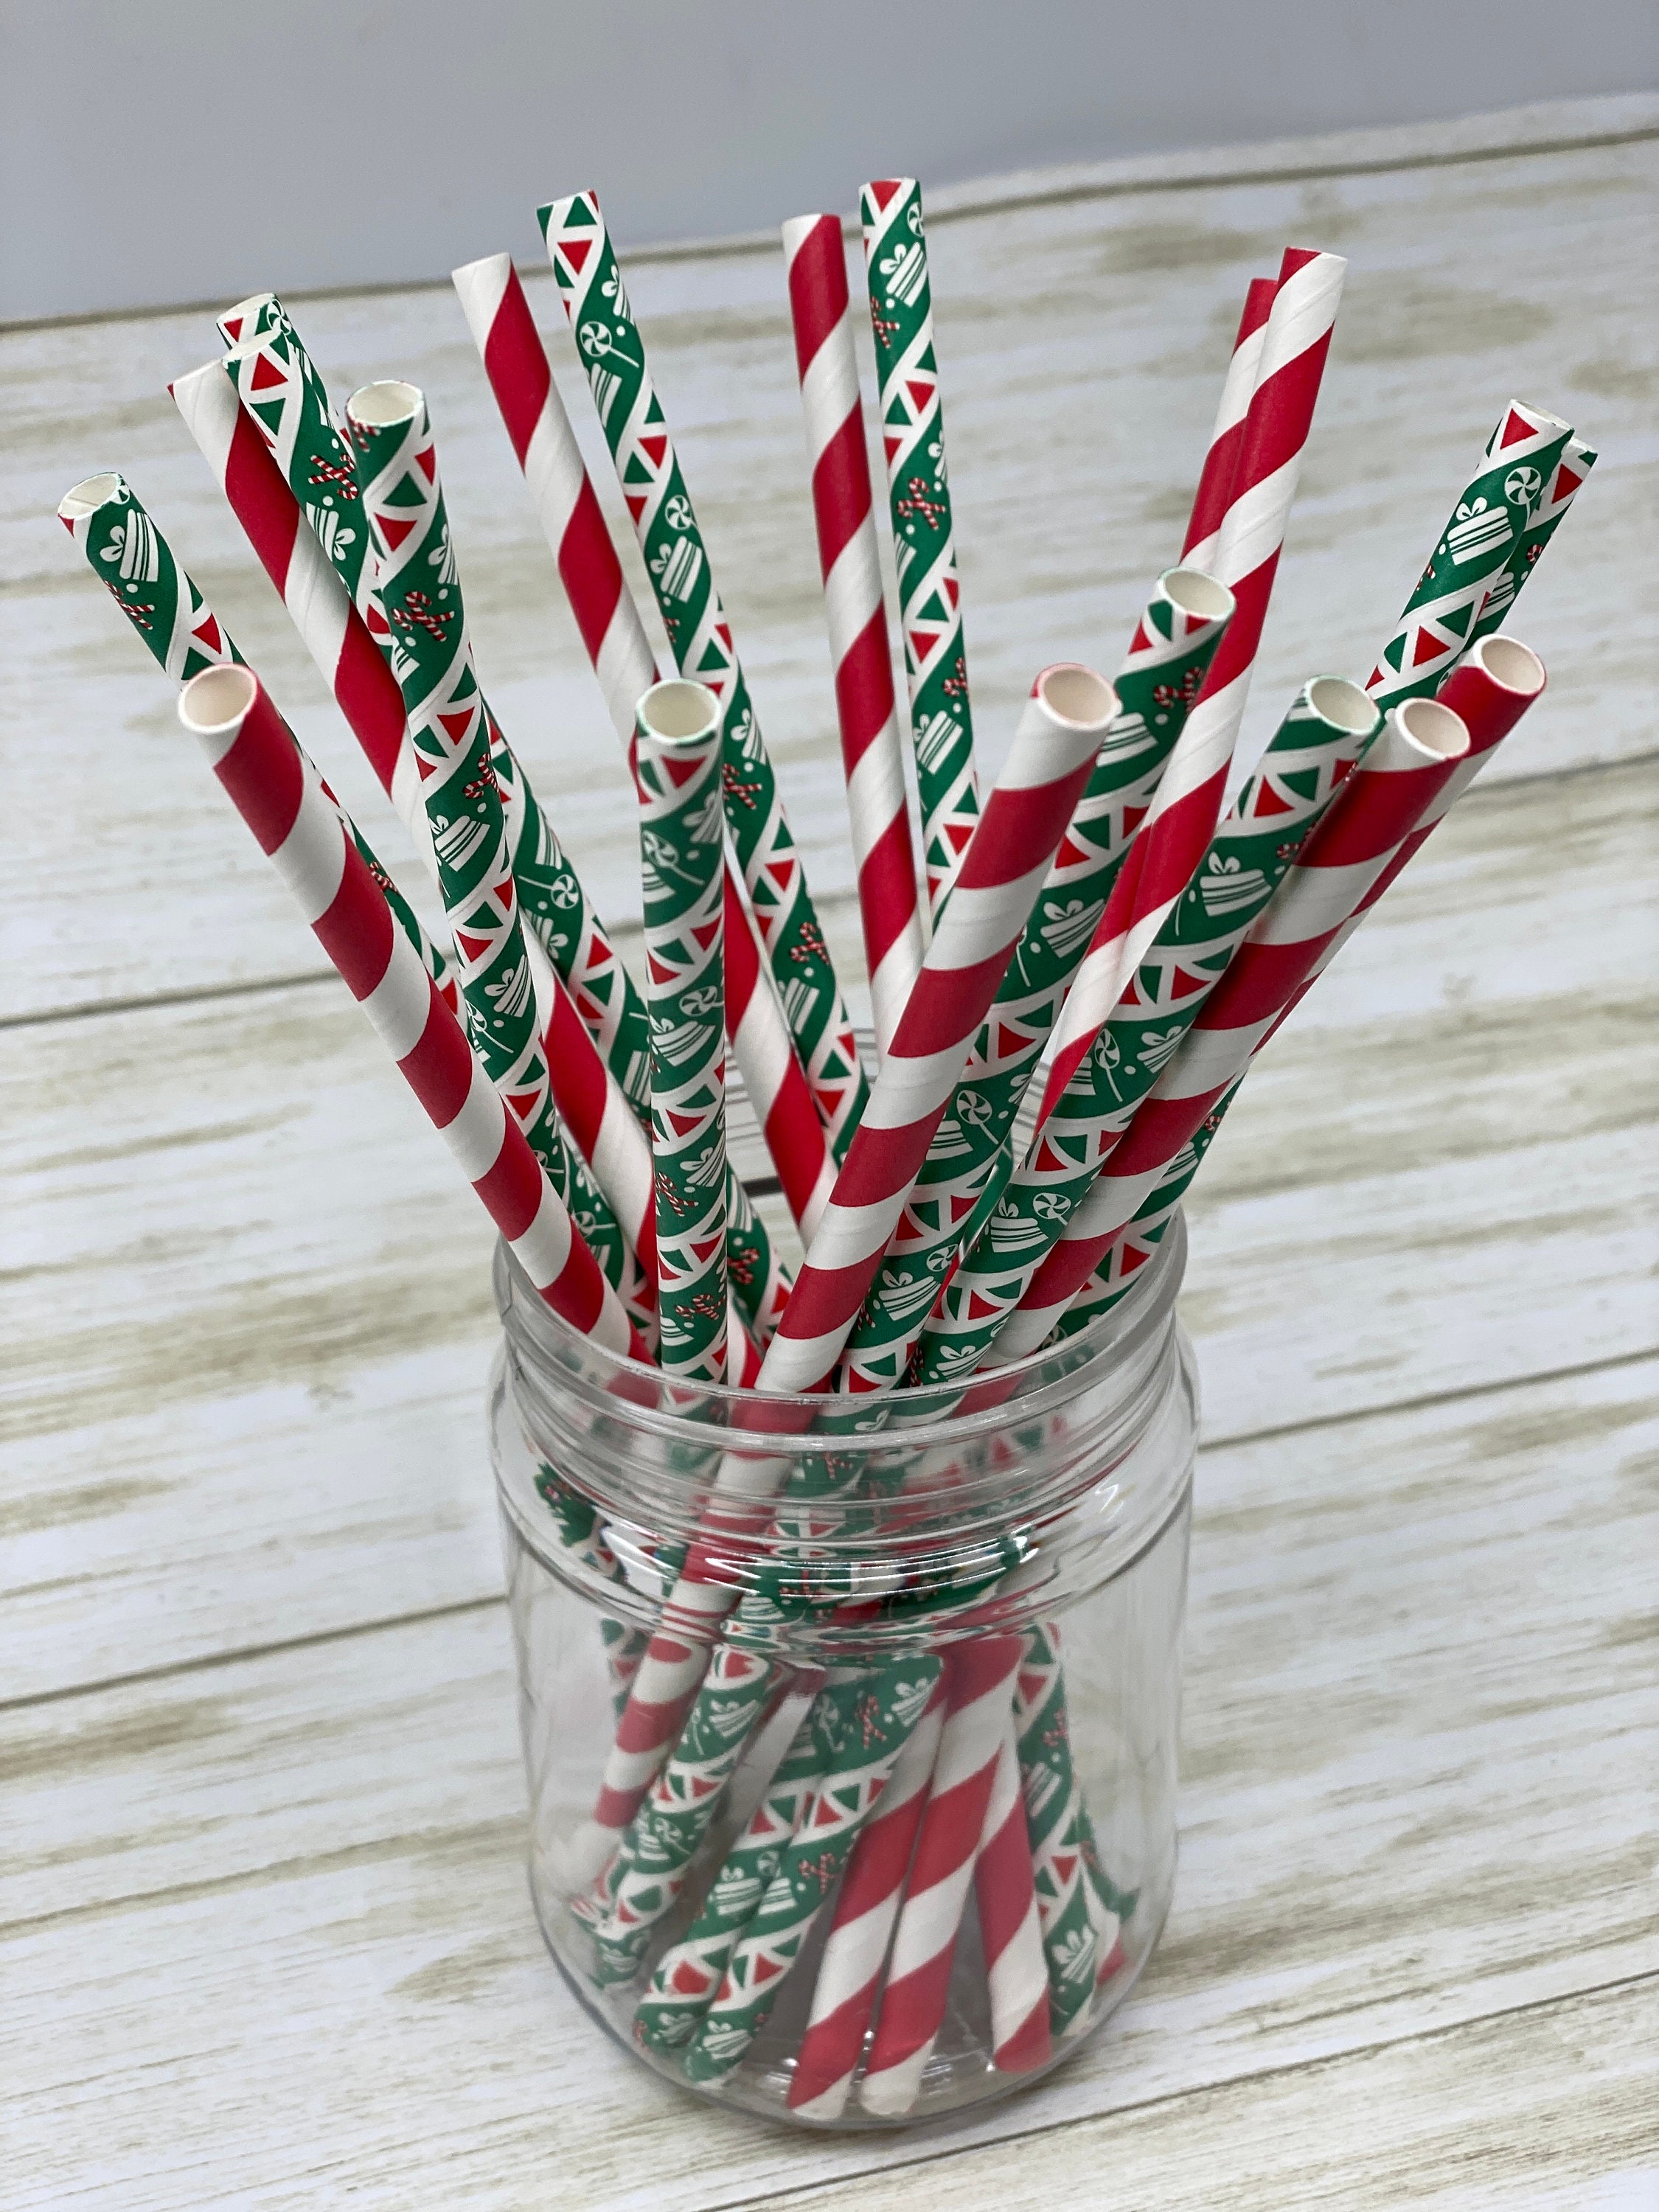 Holiday Time 20 Straws, Red Stripes and Green Stripes, PP Material  ,Christmas Straws,Party